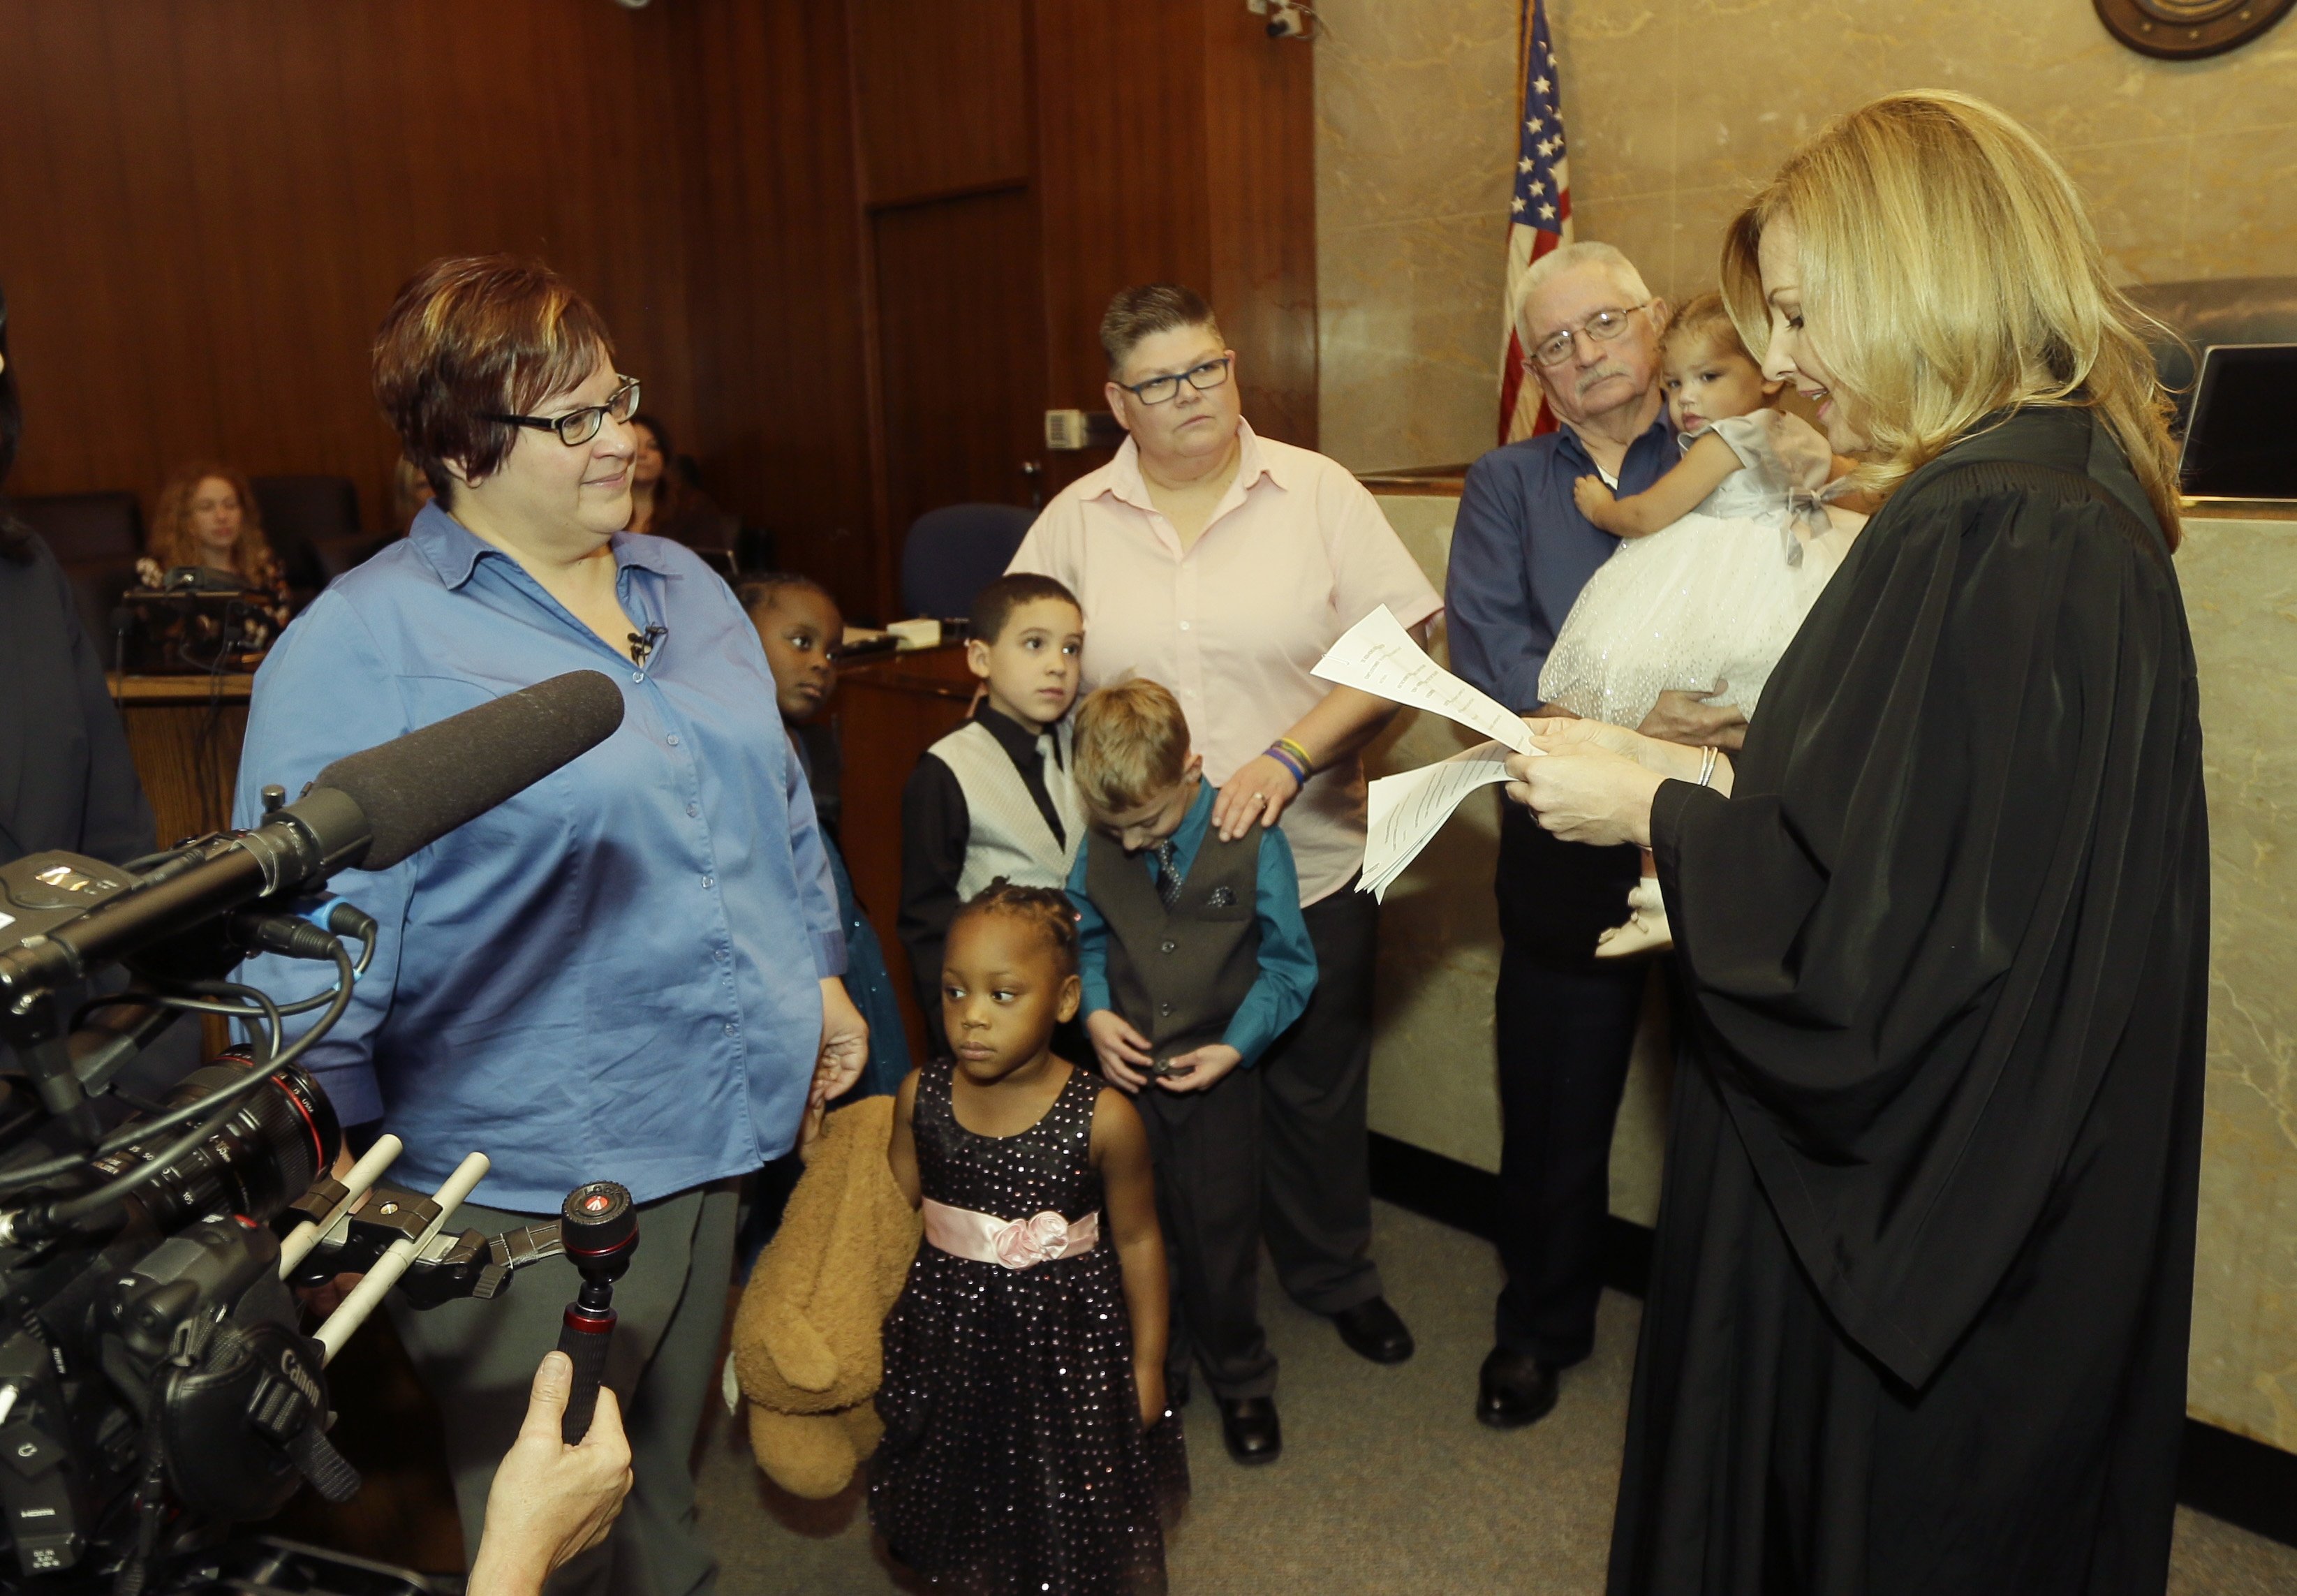 April DeBoer and Jayne Rowse stand before Judge Karen McDonald during an adoption ceremony at the Oakland County Circuit Court, in Pontiac, Mich. on Nov. 5, 2015. (Carlos Osorio—AP)